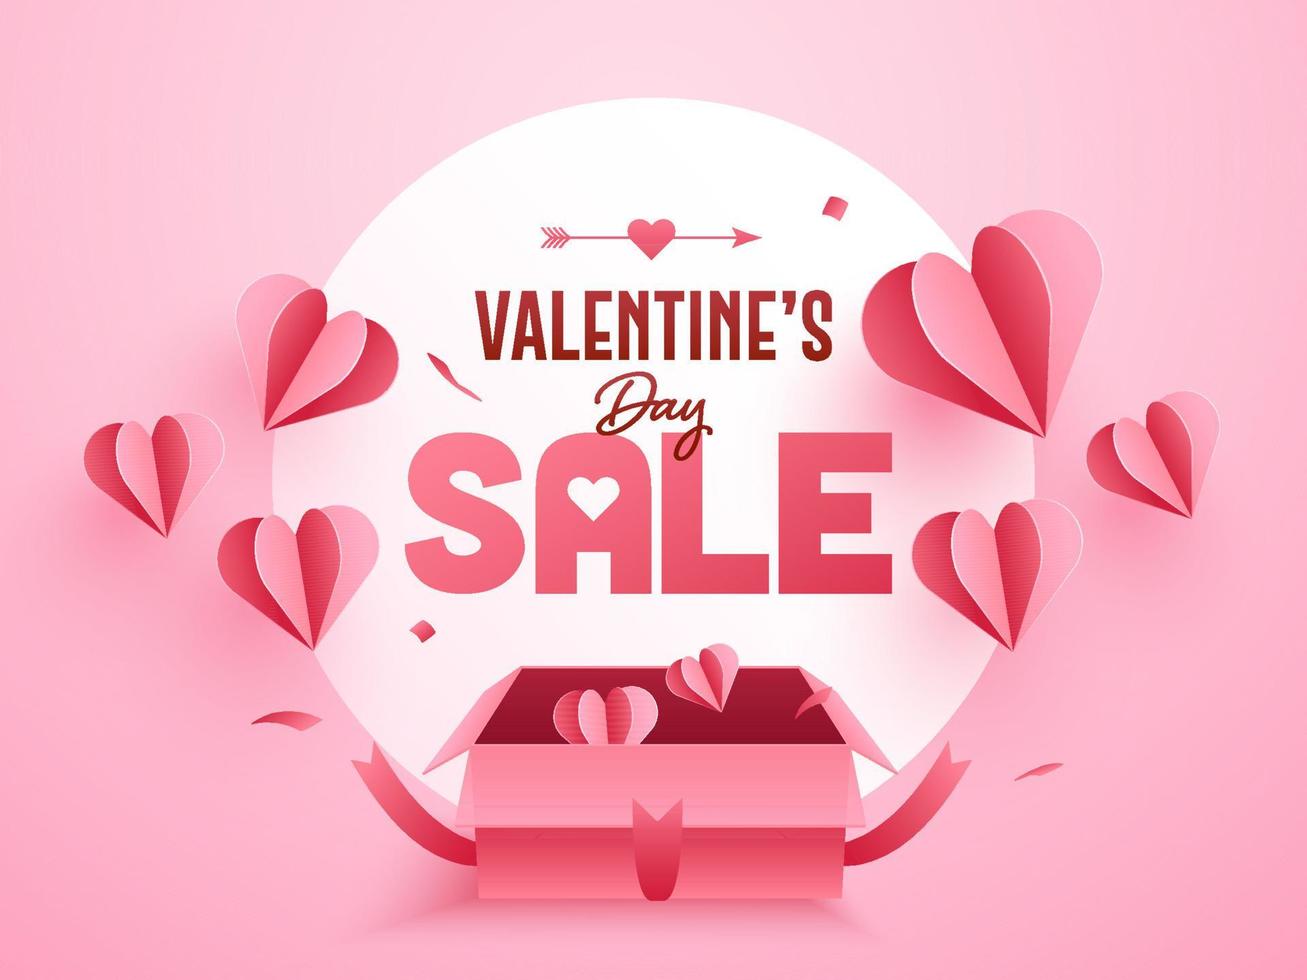 Valentine's Day Sale Poster Design with Open Gift Box and Paper Cut Hearts Decorated on Pink Background. vector